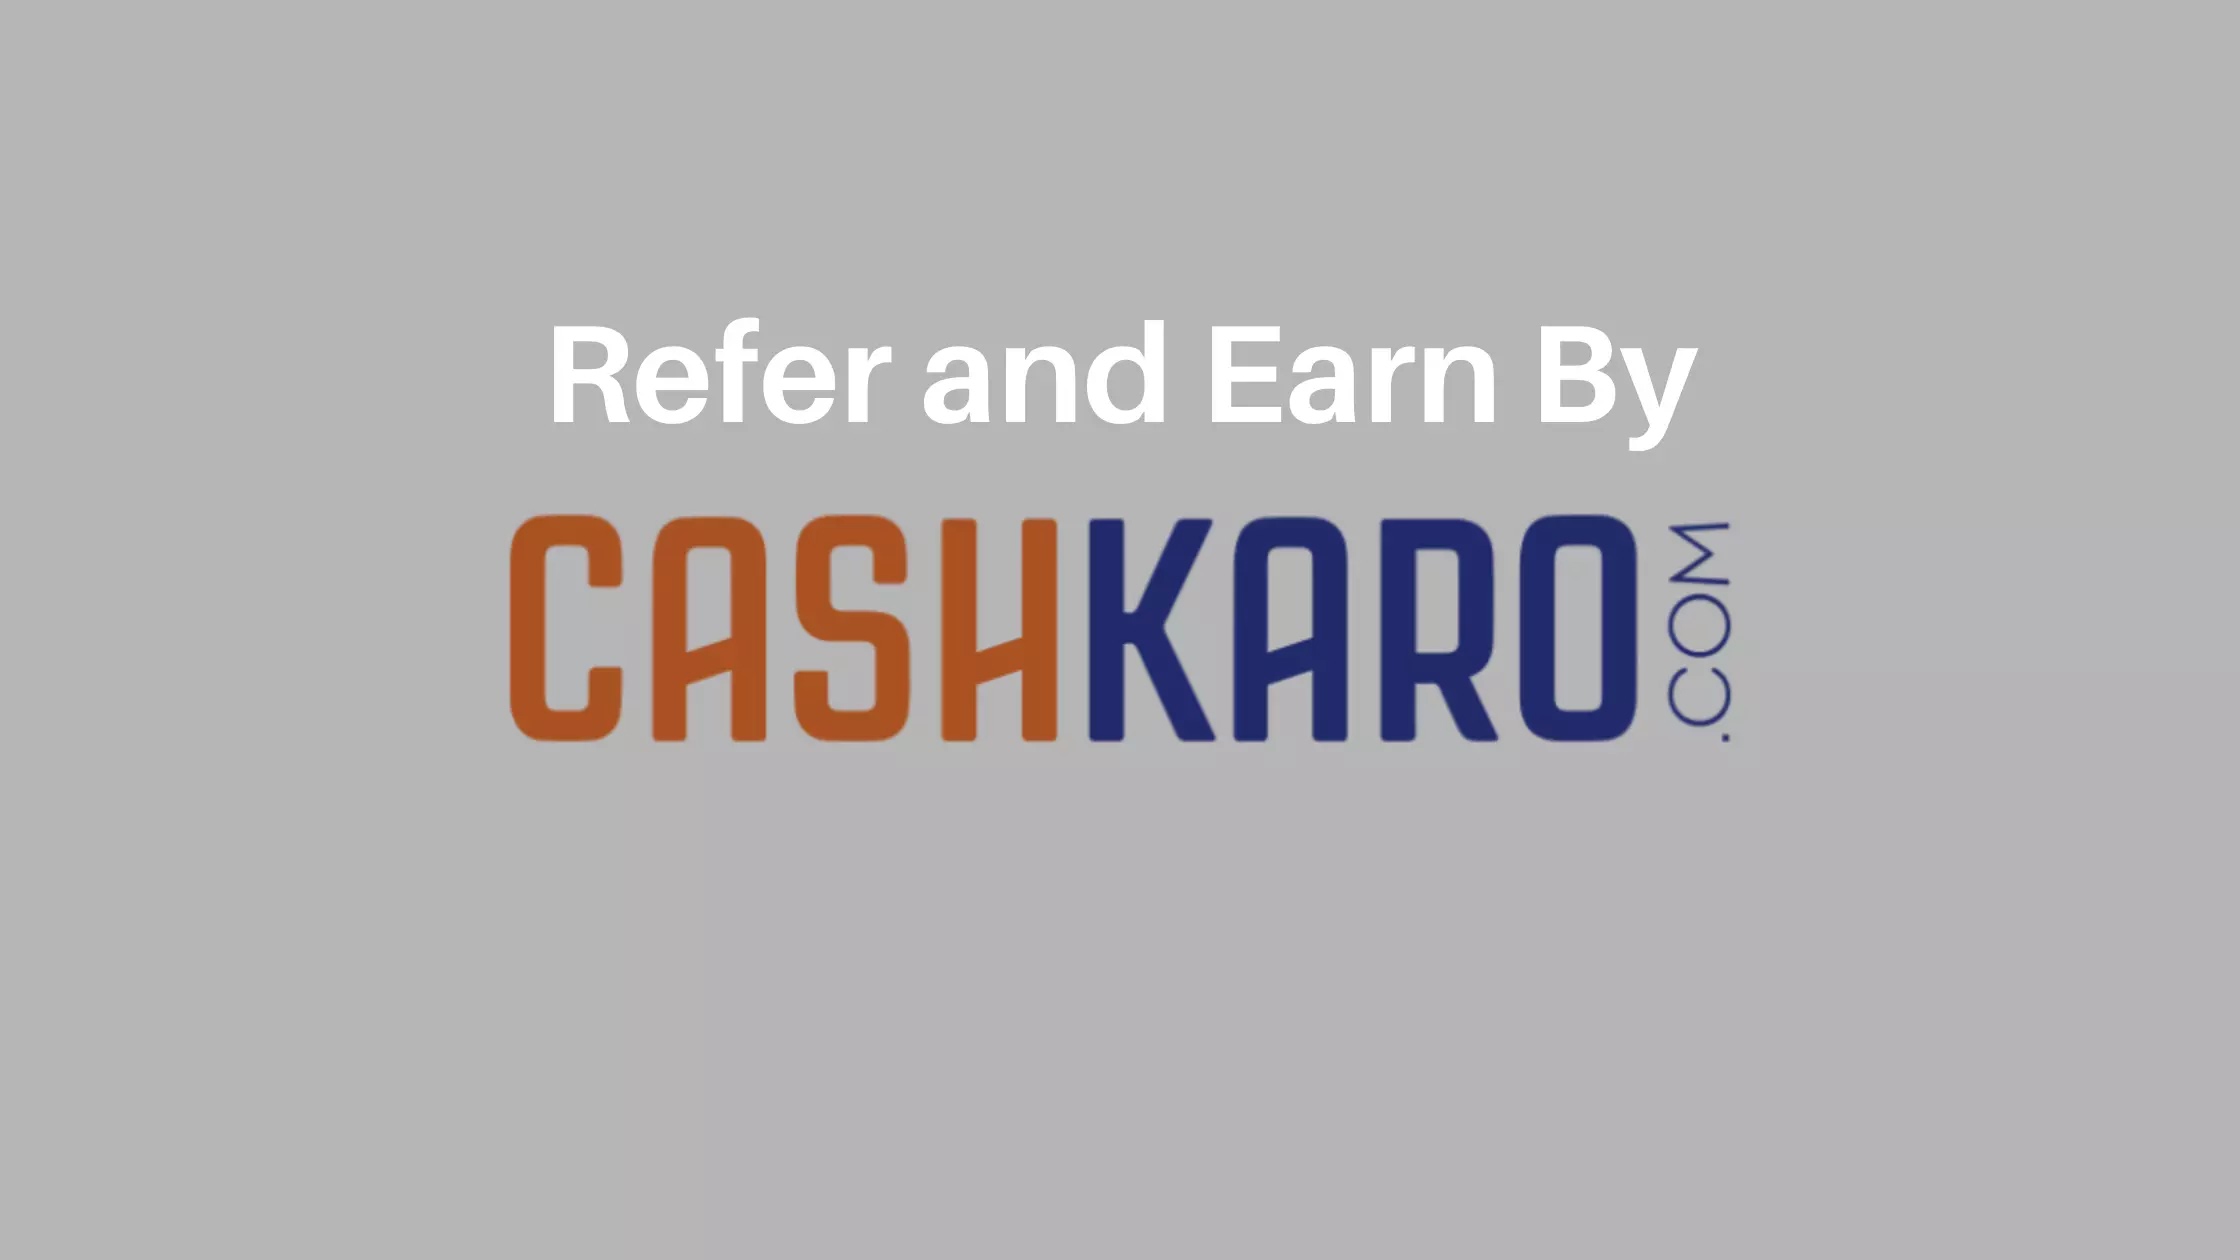 refer and earn CashKaro, refer and earning app in india